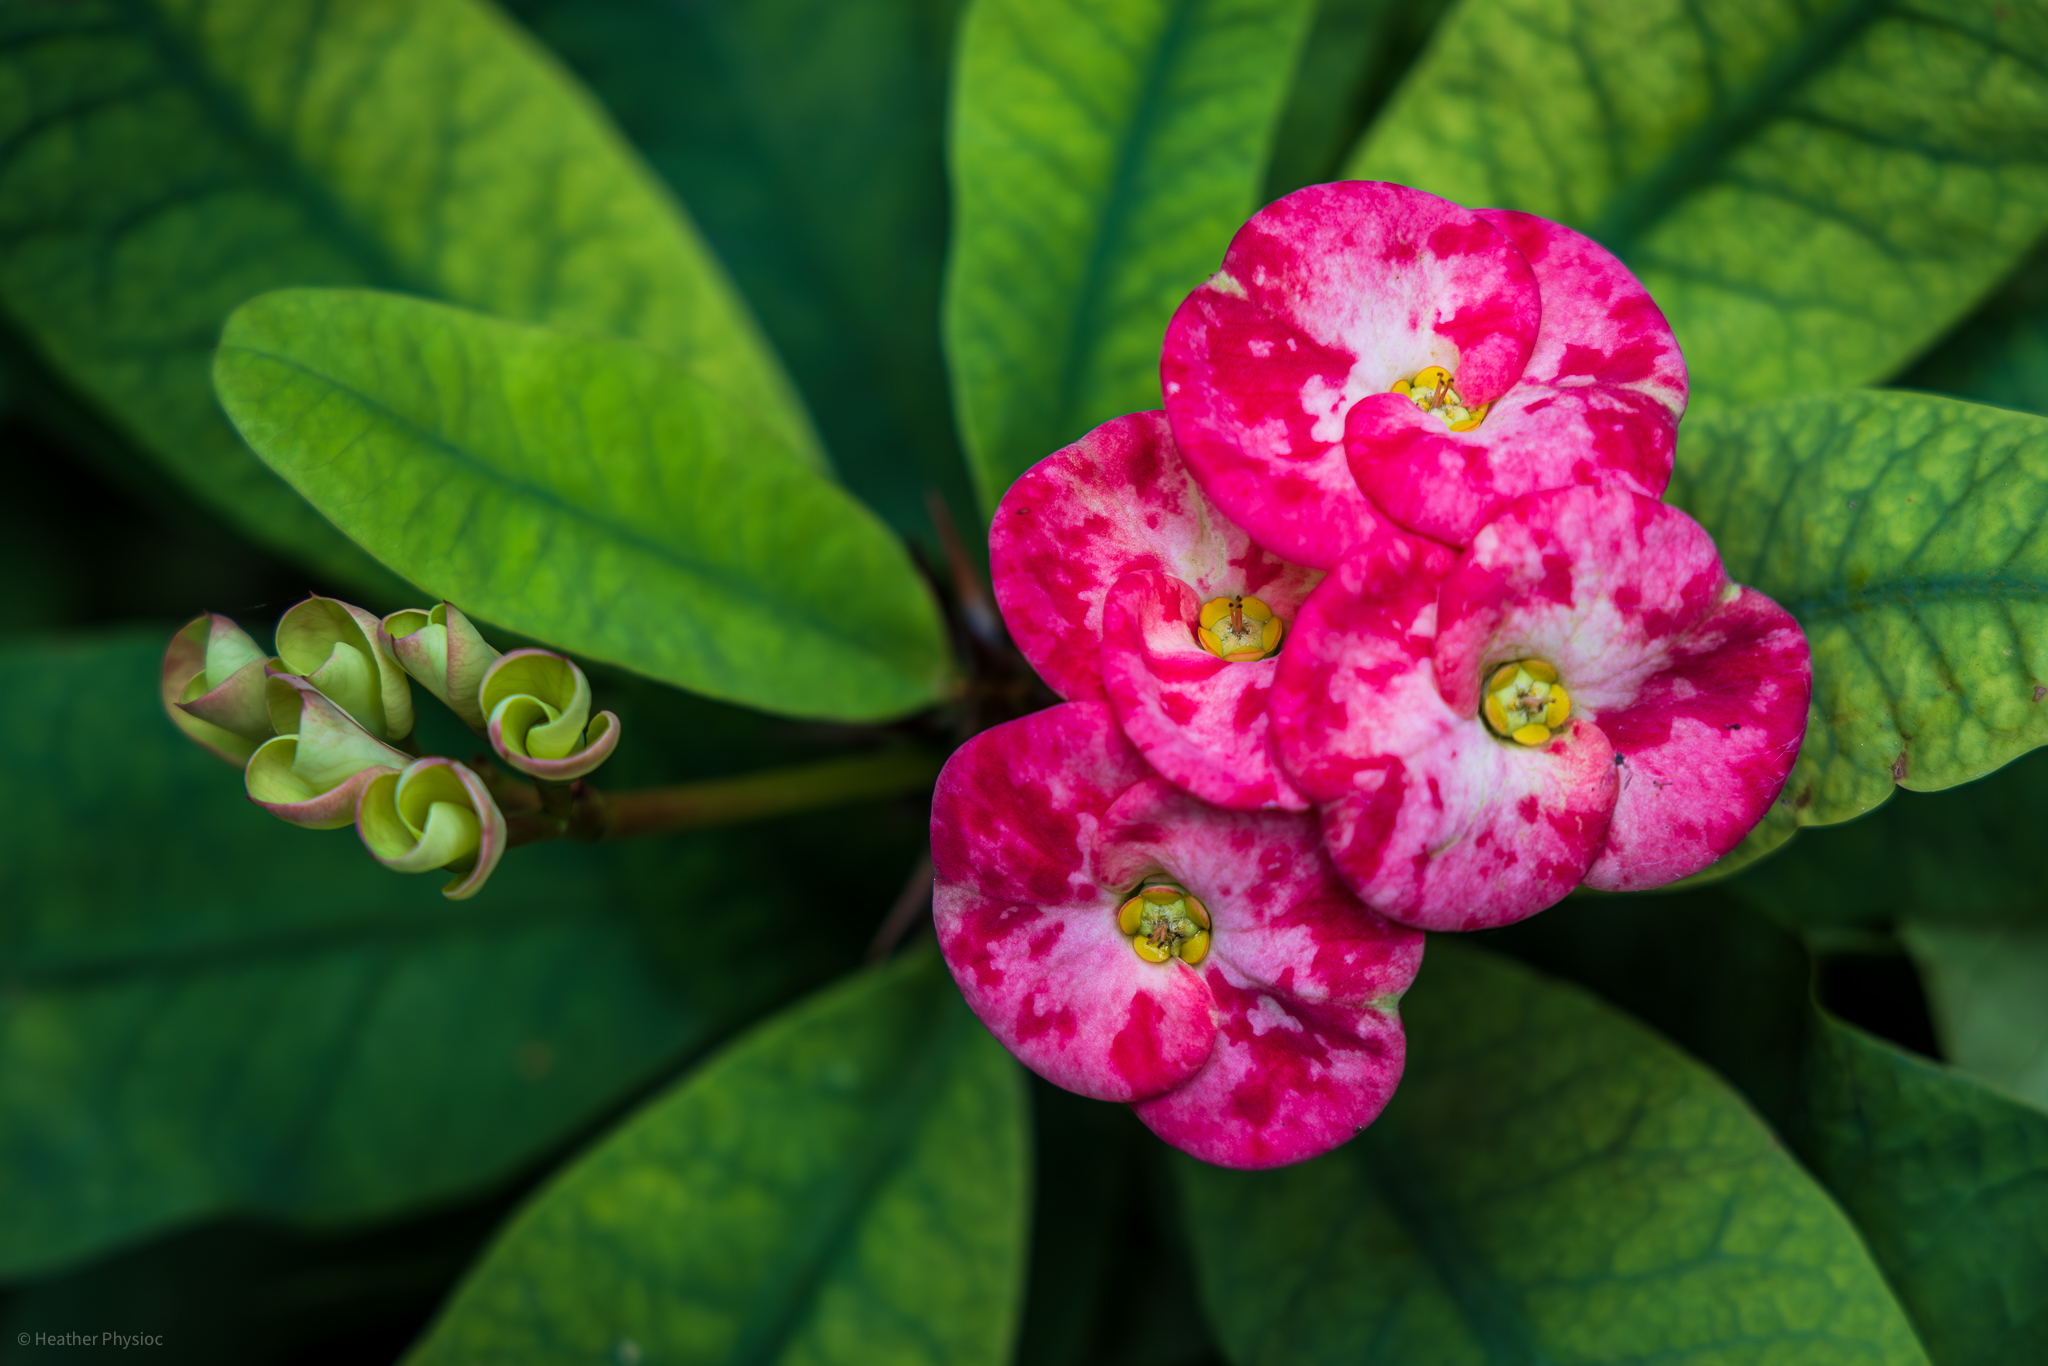 The striking pink and white blooms of a Crown of Thorns (Euphorbia) plant, with its vibrant flowers standing out against the lush green leaves in a garden in Yucatan, Mexico.